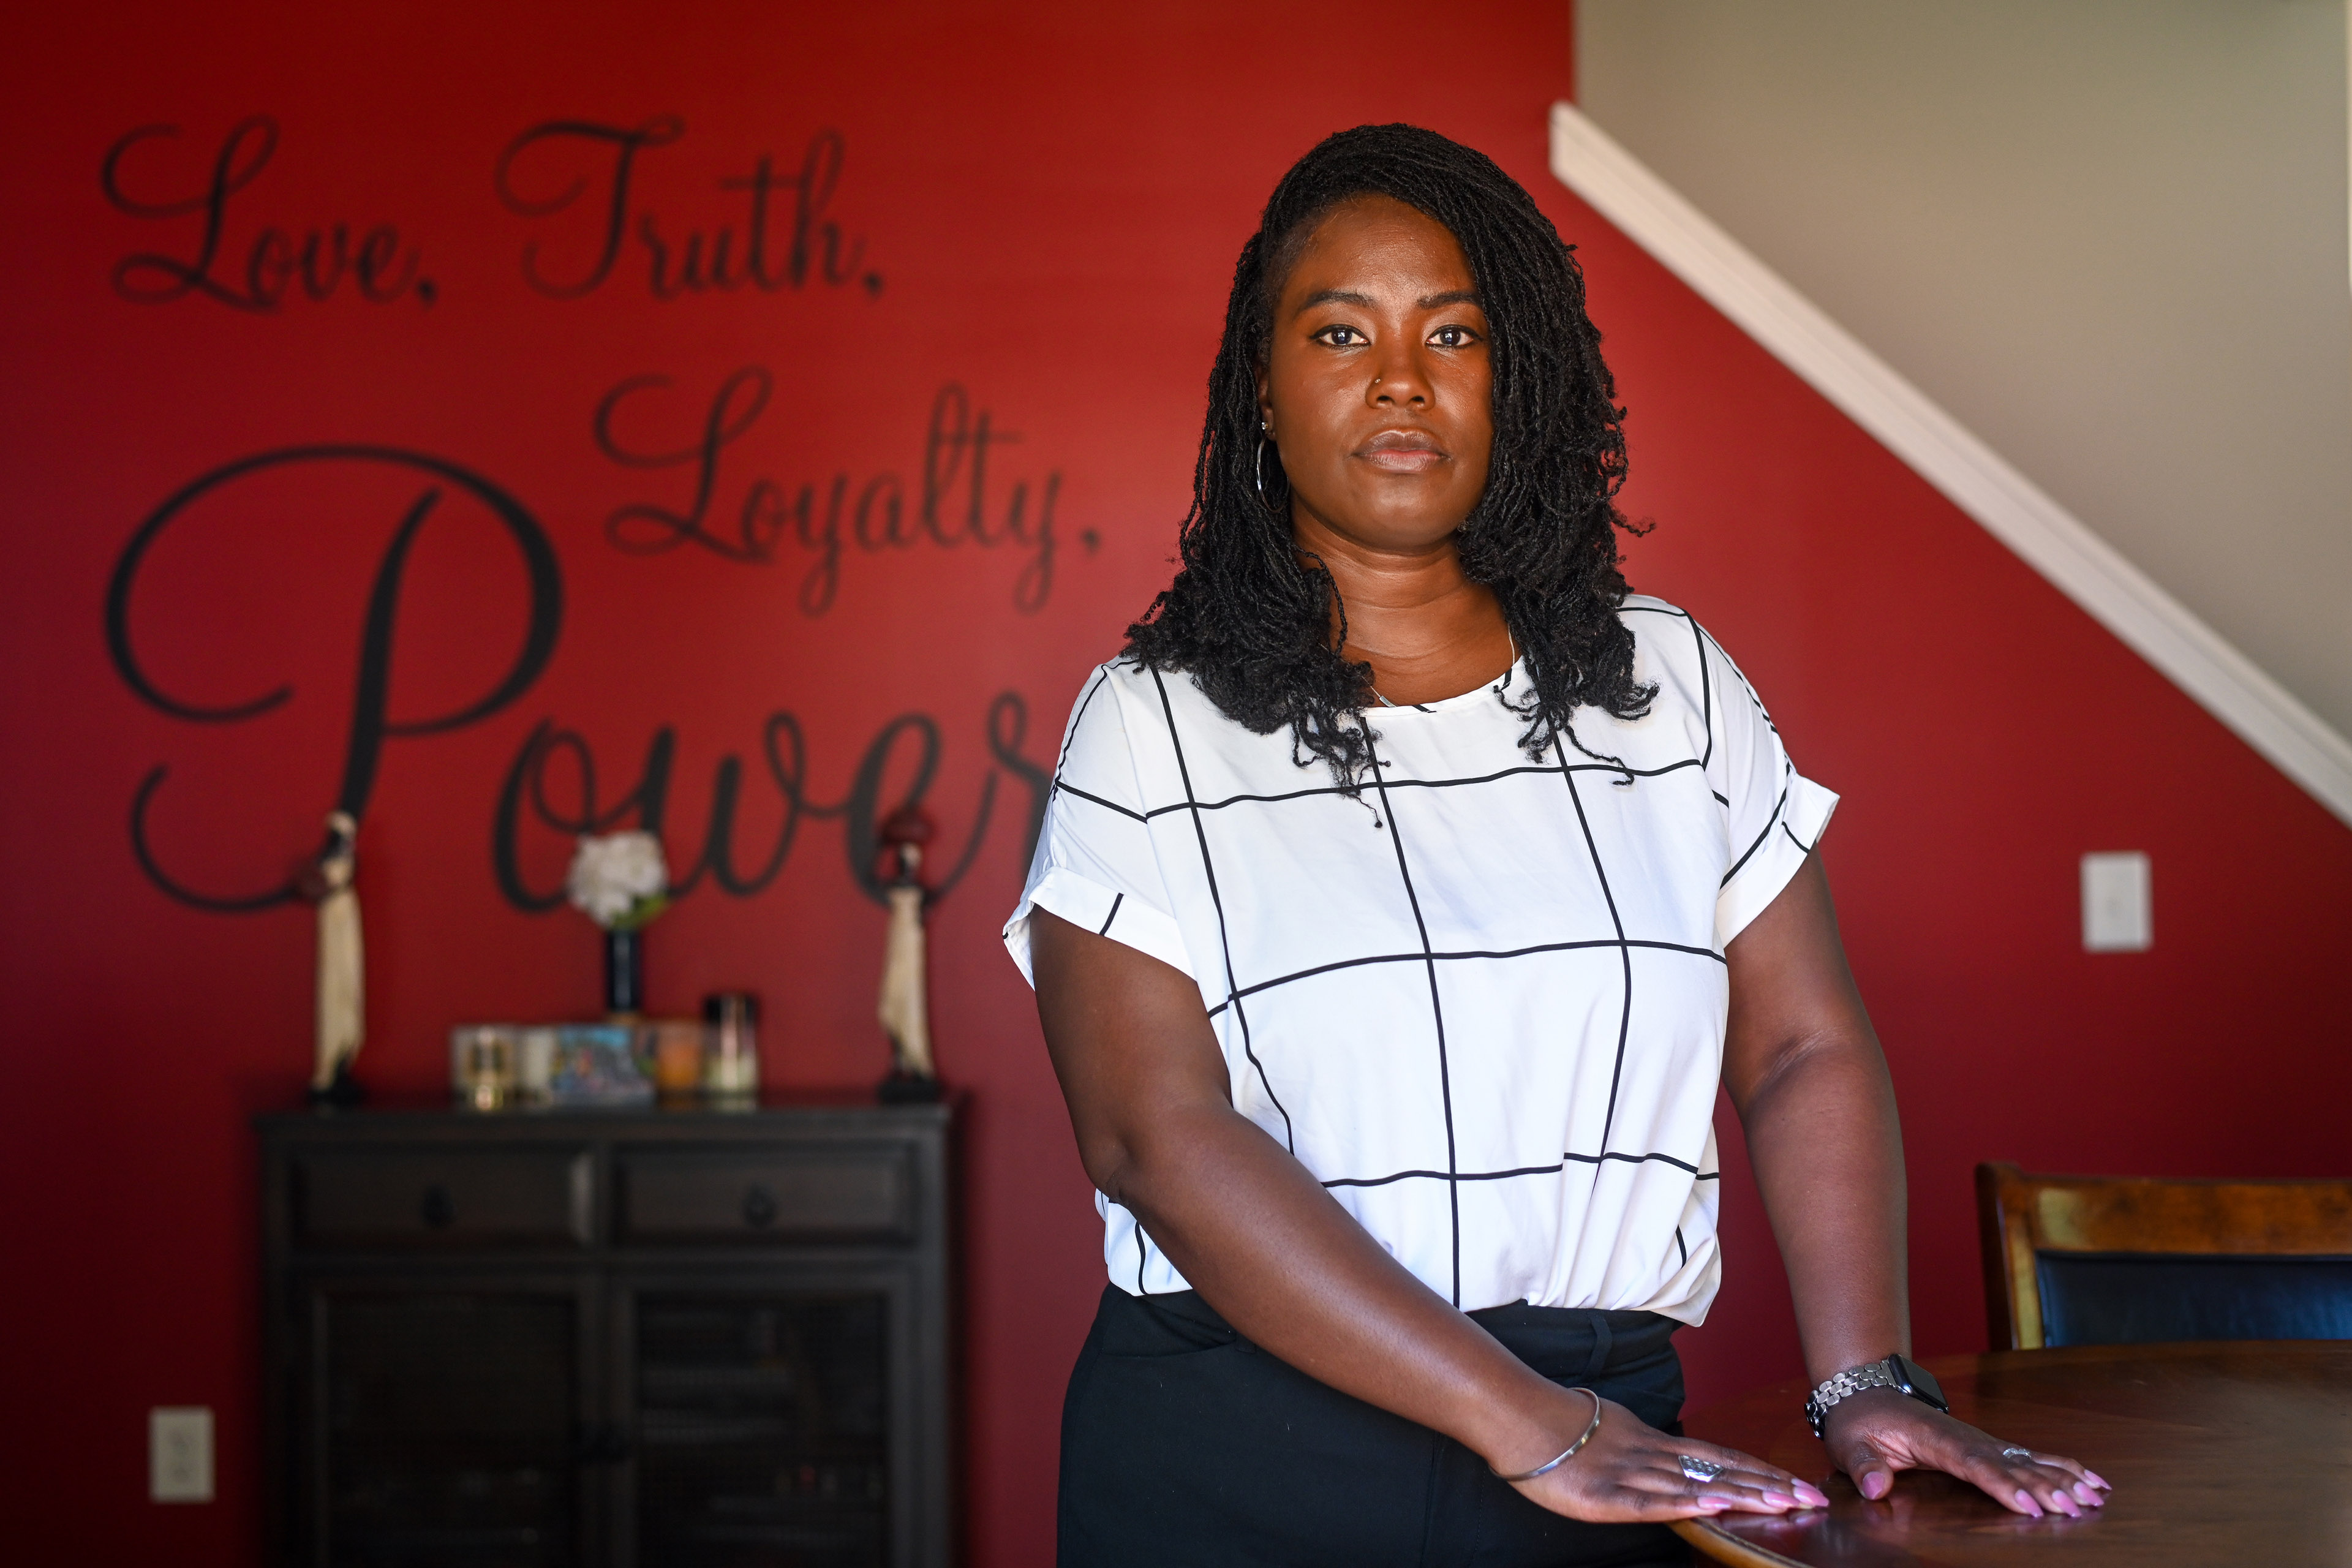 Charity Watkins stands in her home. Behind her on a red wall, large words in elegant script read, "Love, Truth, Loyalty, Power."